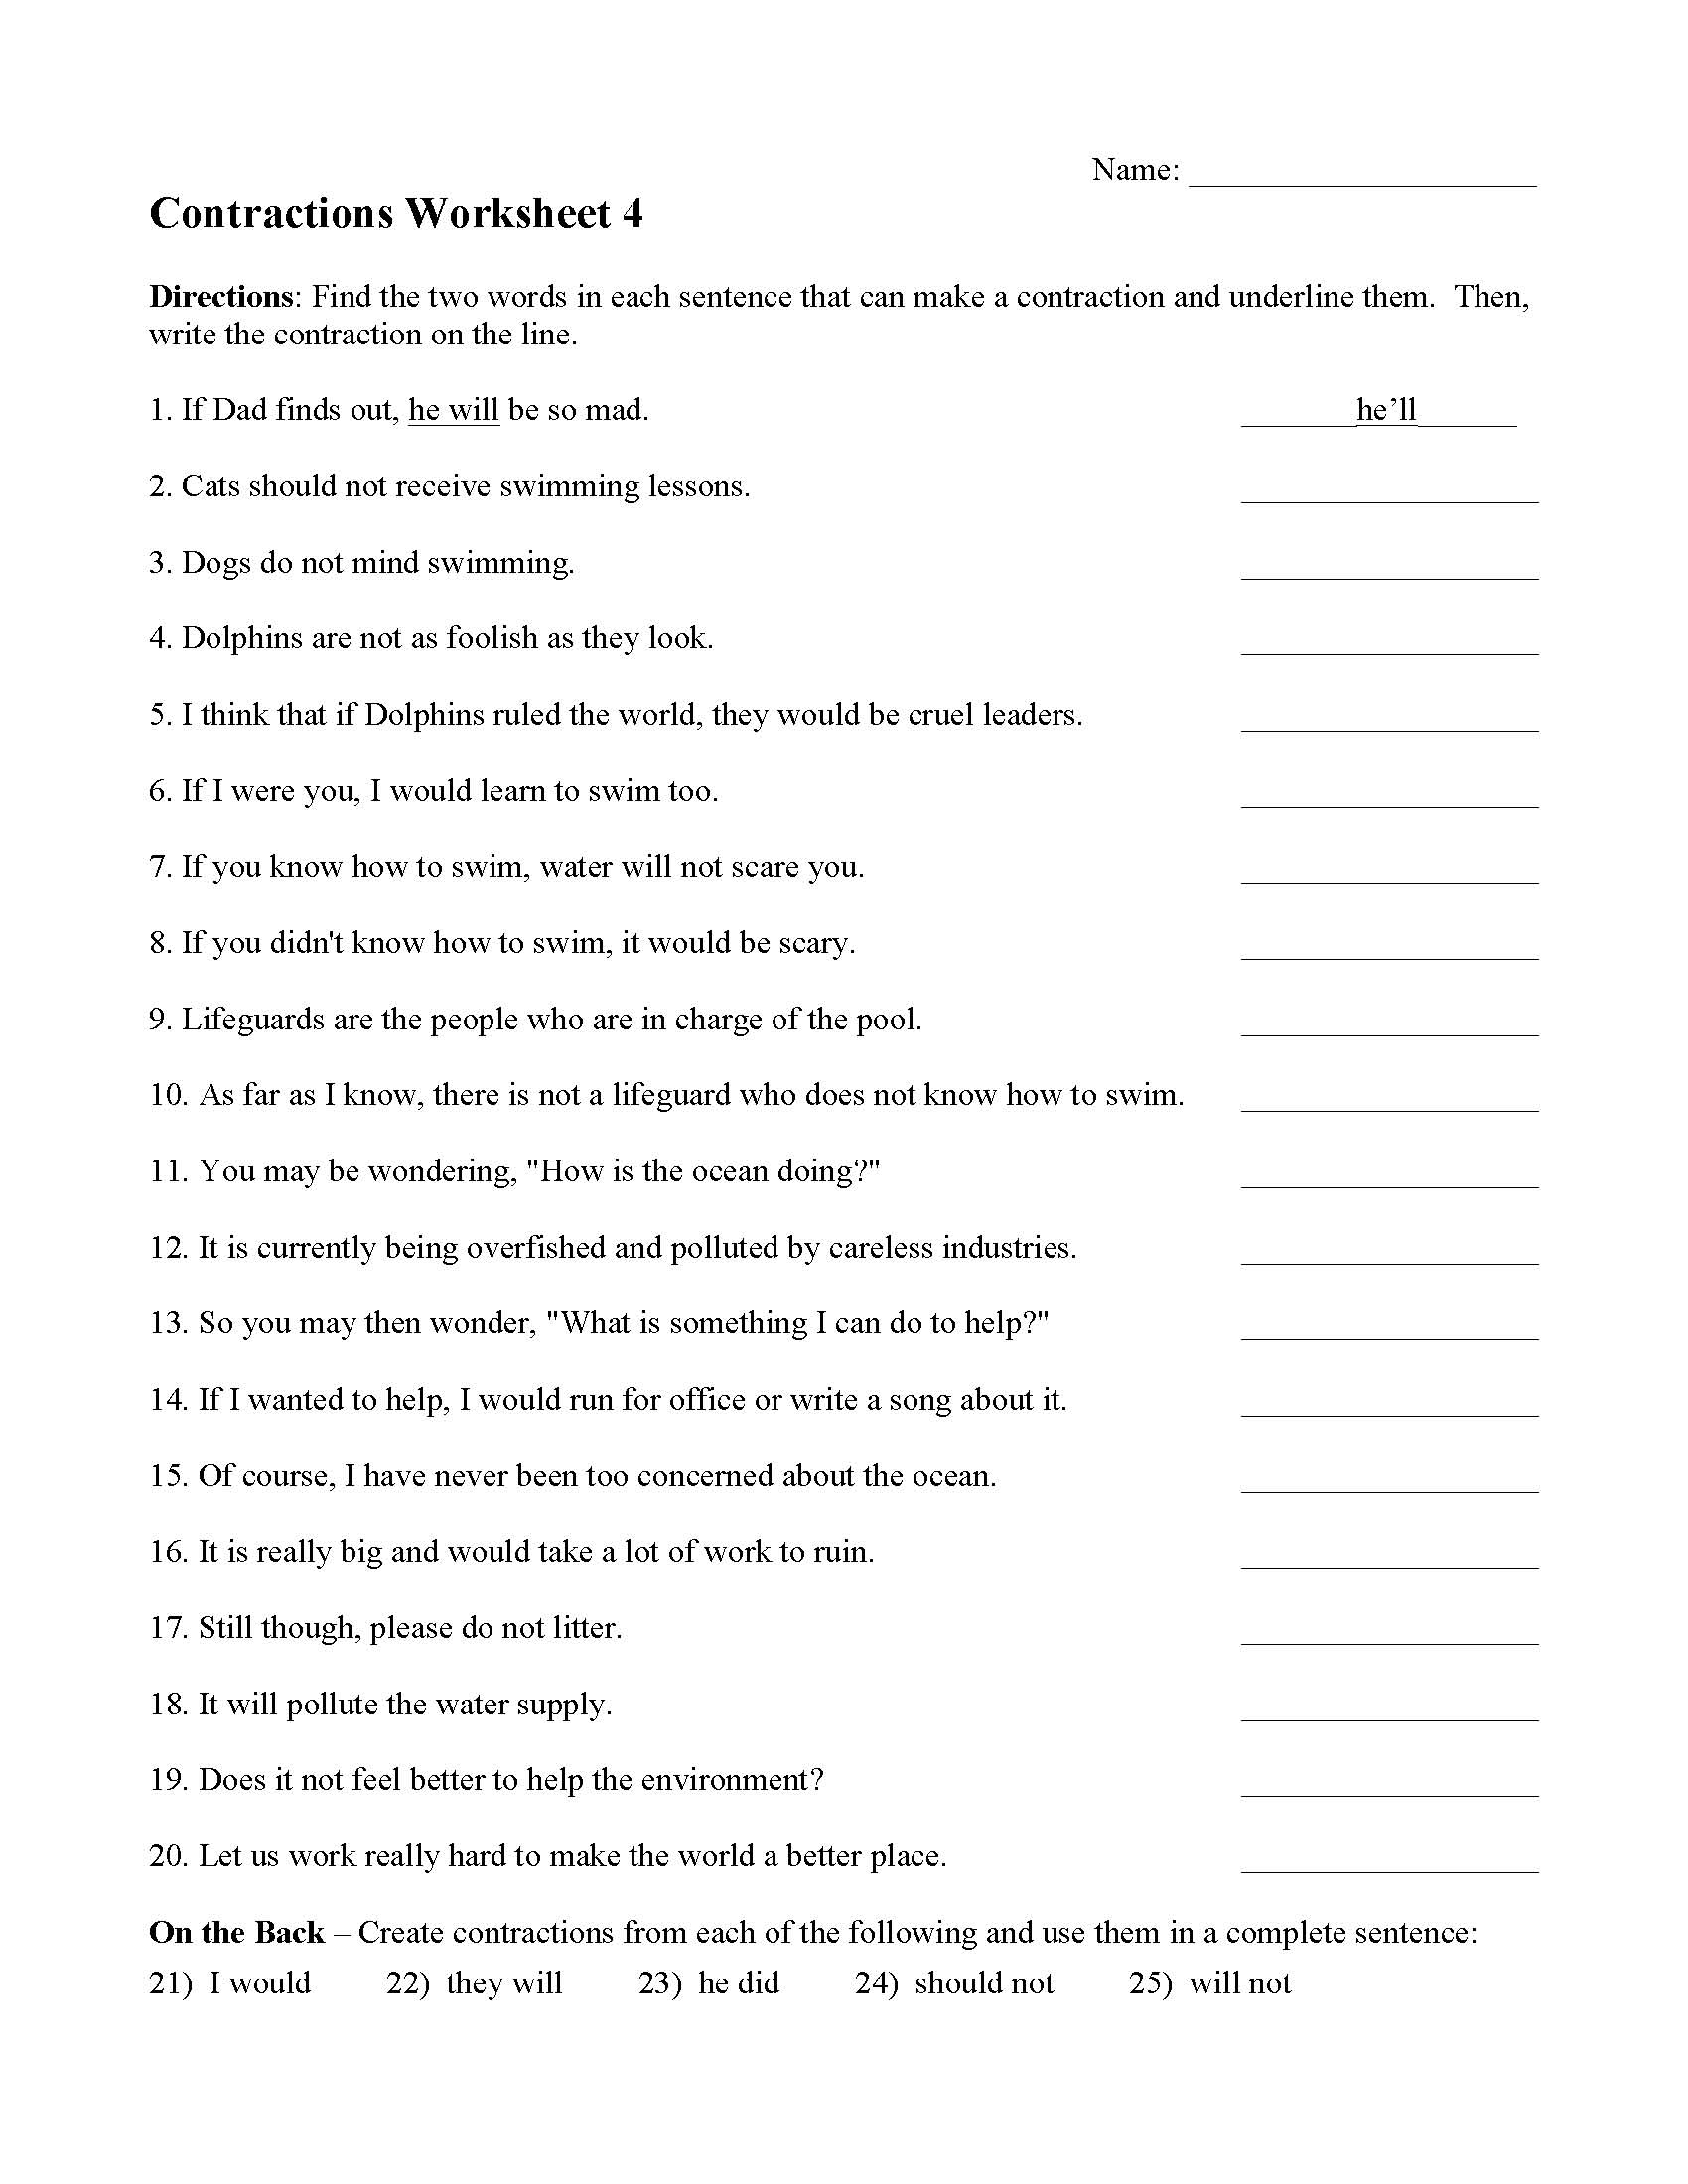 Contractions Worksheets And Activities Language Arts And Grammar